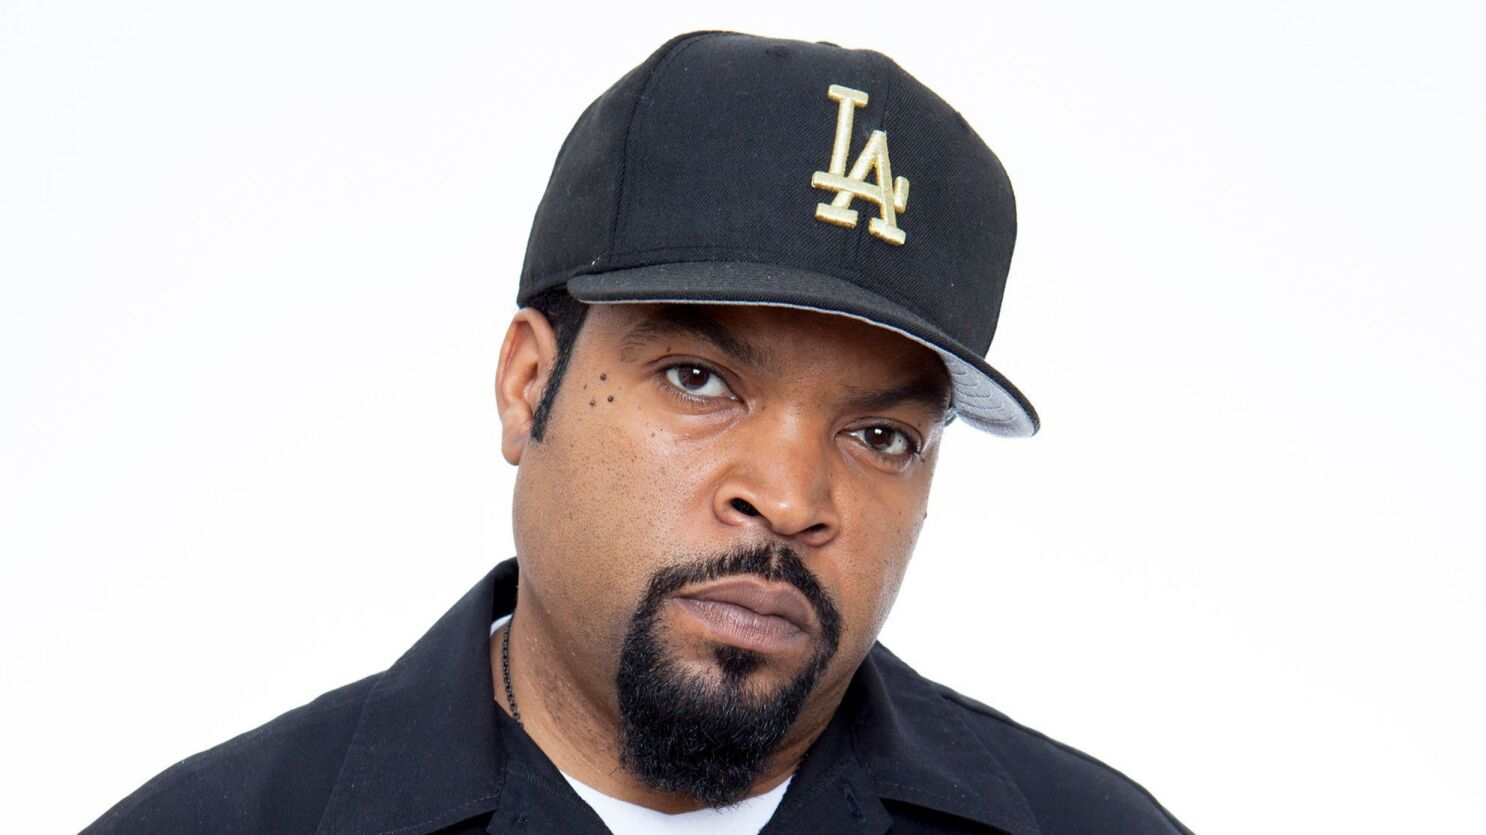 Ice Cube walks away from $9M movie role after refusing to get vaccinated